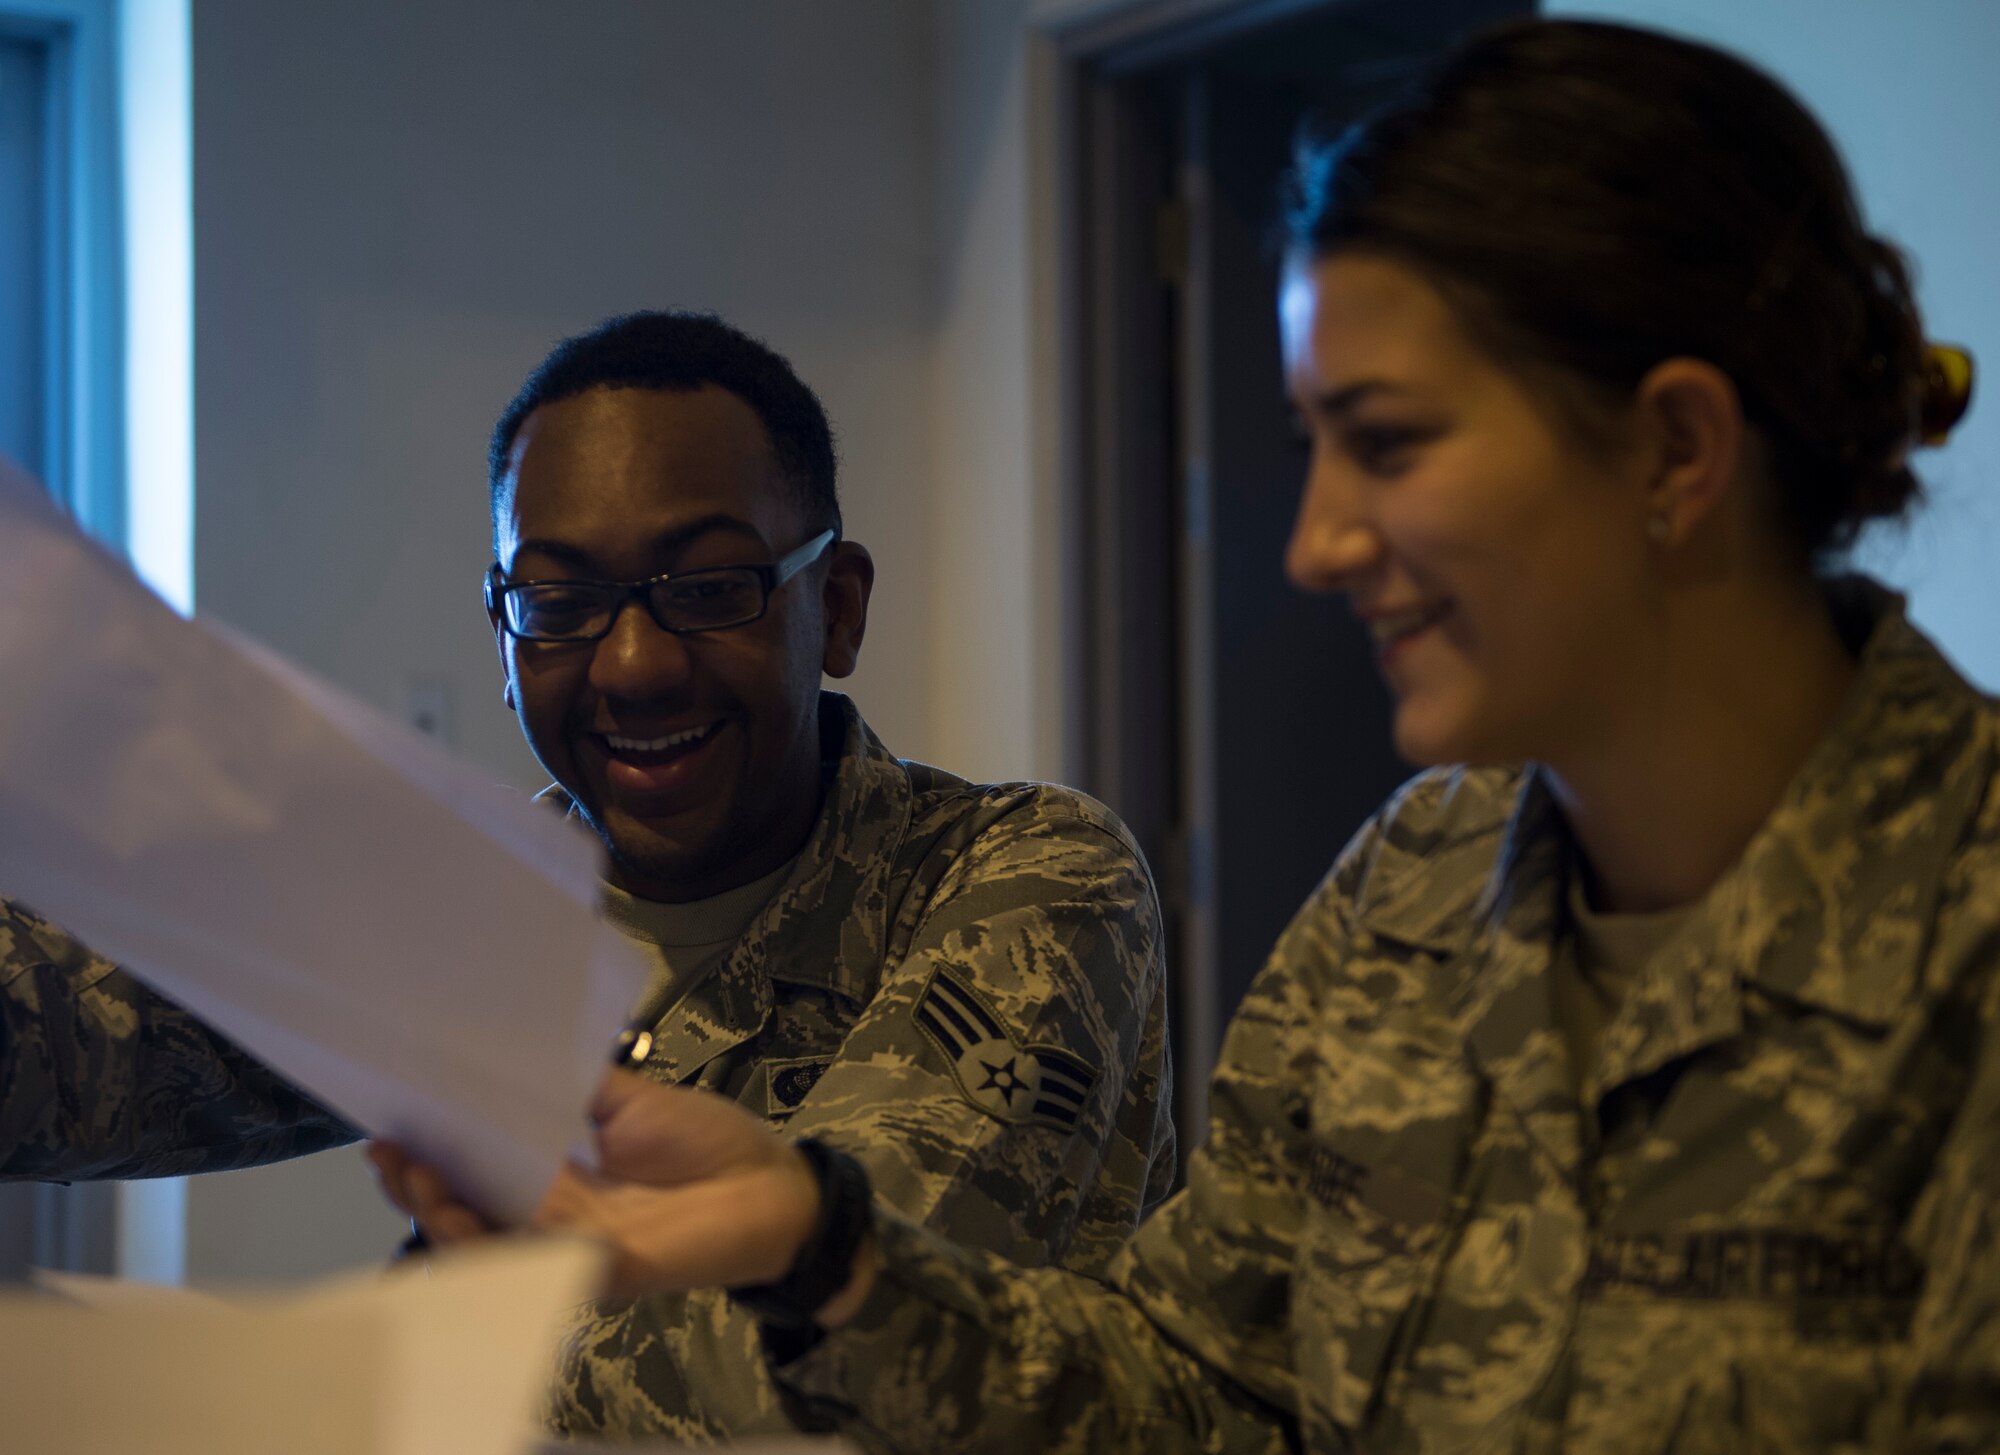 U.S. Air Force Senior Airman Jabari Superville, left, hands two shipping manifests to Senior Airman Airiana Magee, both with the 379th Expeditionary Force Support Squadron to ensures the invoice matches the shipment at Al Udeid Air Base, Qatar May 10, 2017. Each week, a small team of Airmen work together to review shipments of produce, making sure the numbers matches the quantity received and that the quality of the produce meets standards. (U.S. Air Force photo by Tech. Sgt. Amy M. Lovgren)